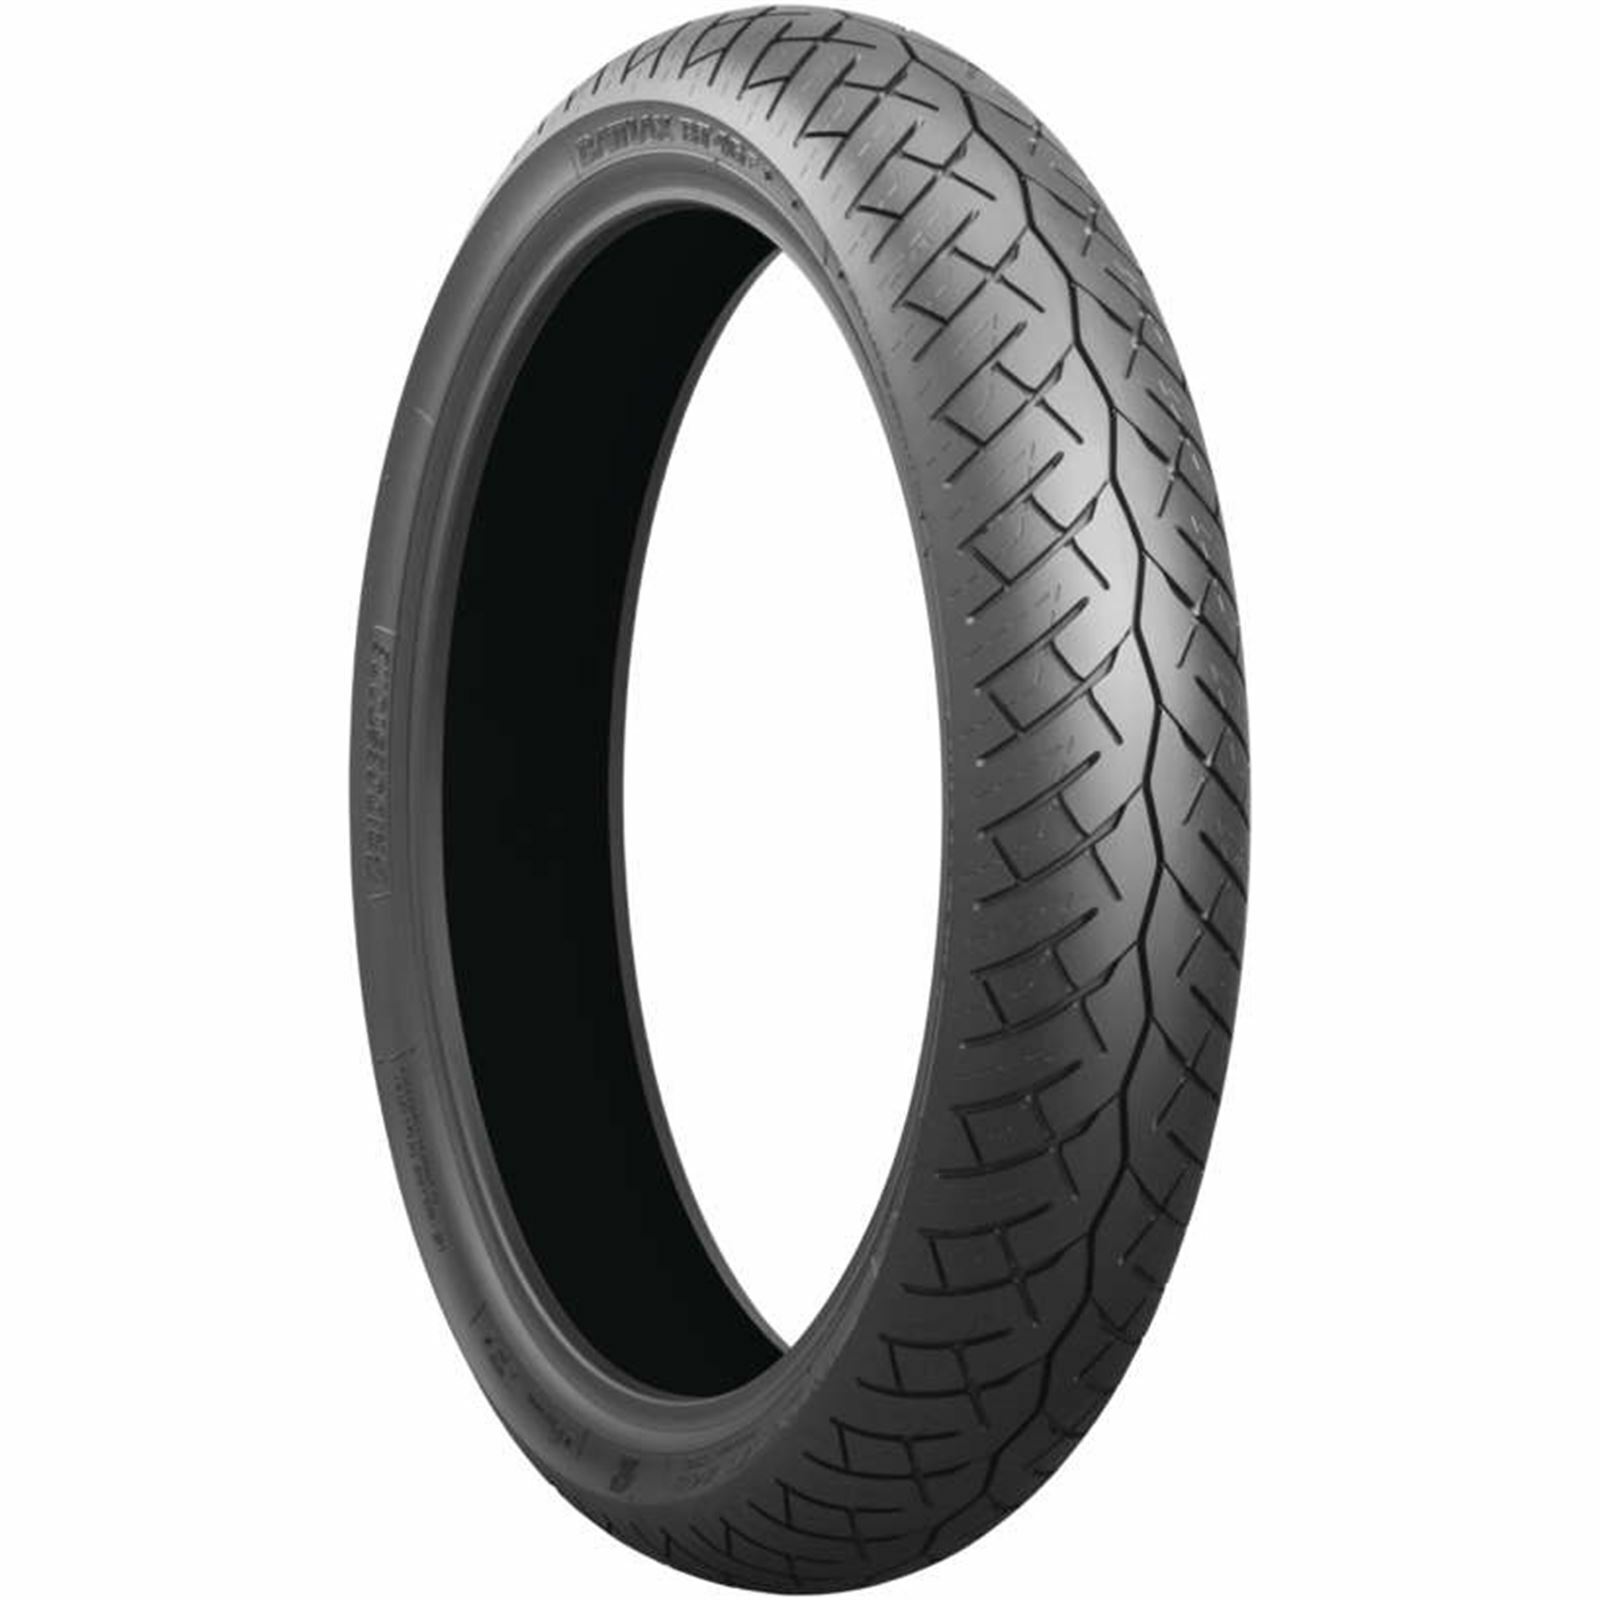 BATTLAX BT46 SPORT TOURING TIRE - Limited price sale 100 90-19 BIAS TUBELESS Charlotte Mall FRONT 12748 57H